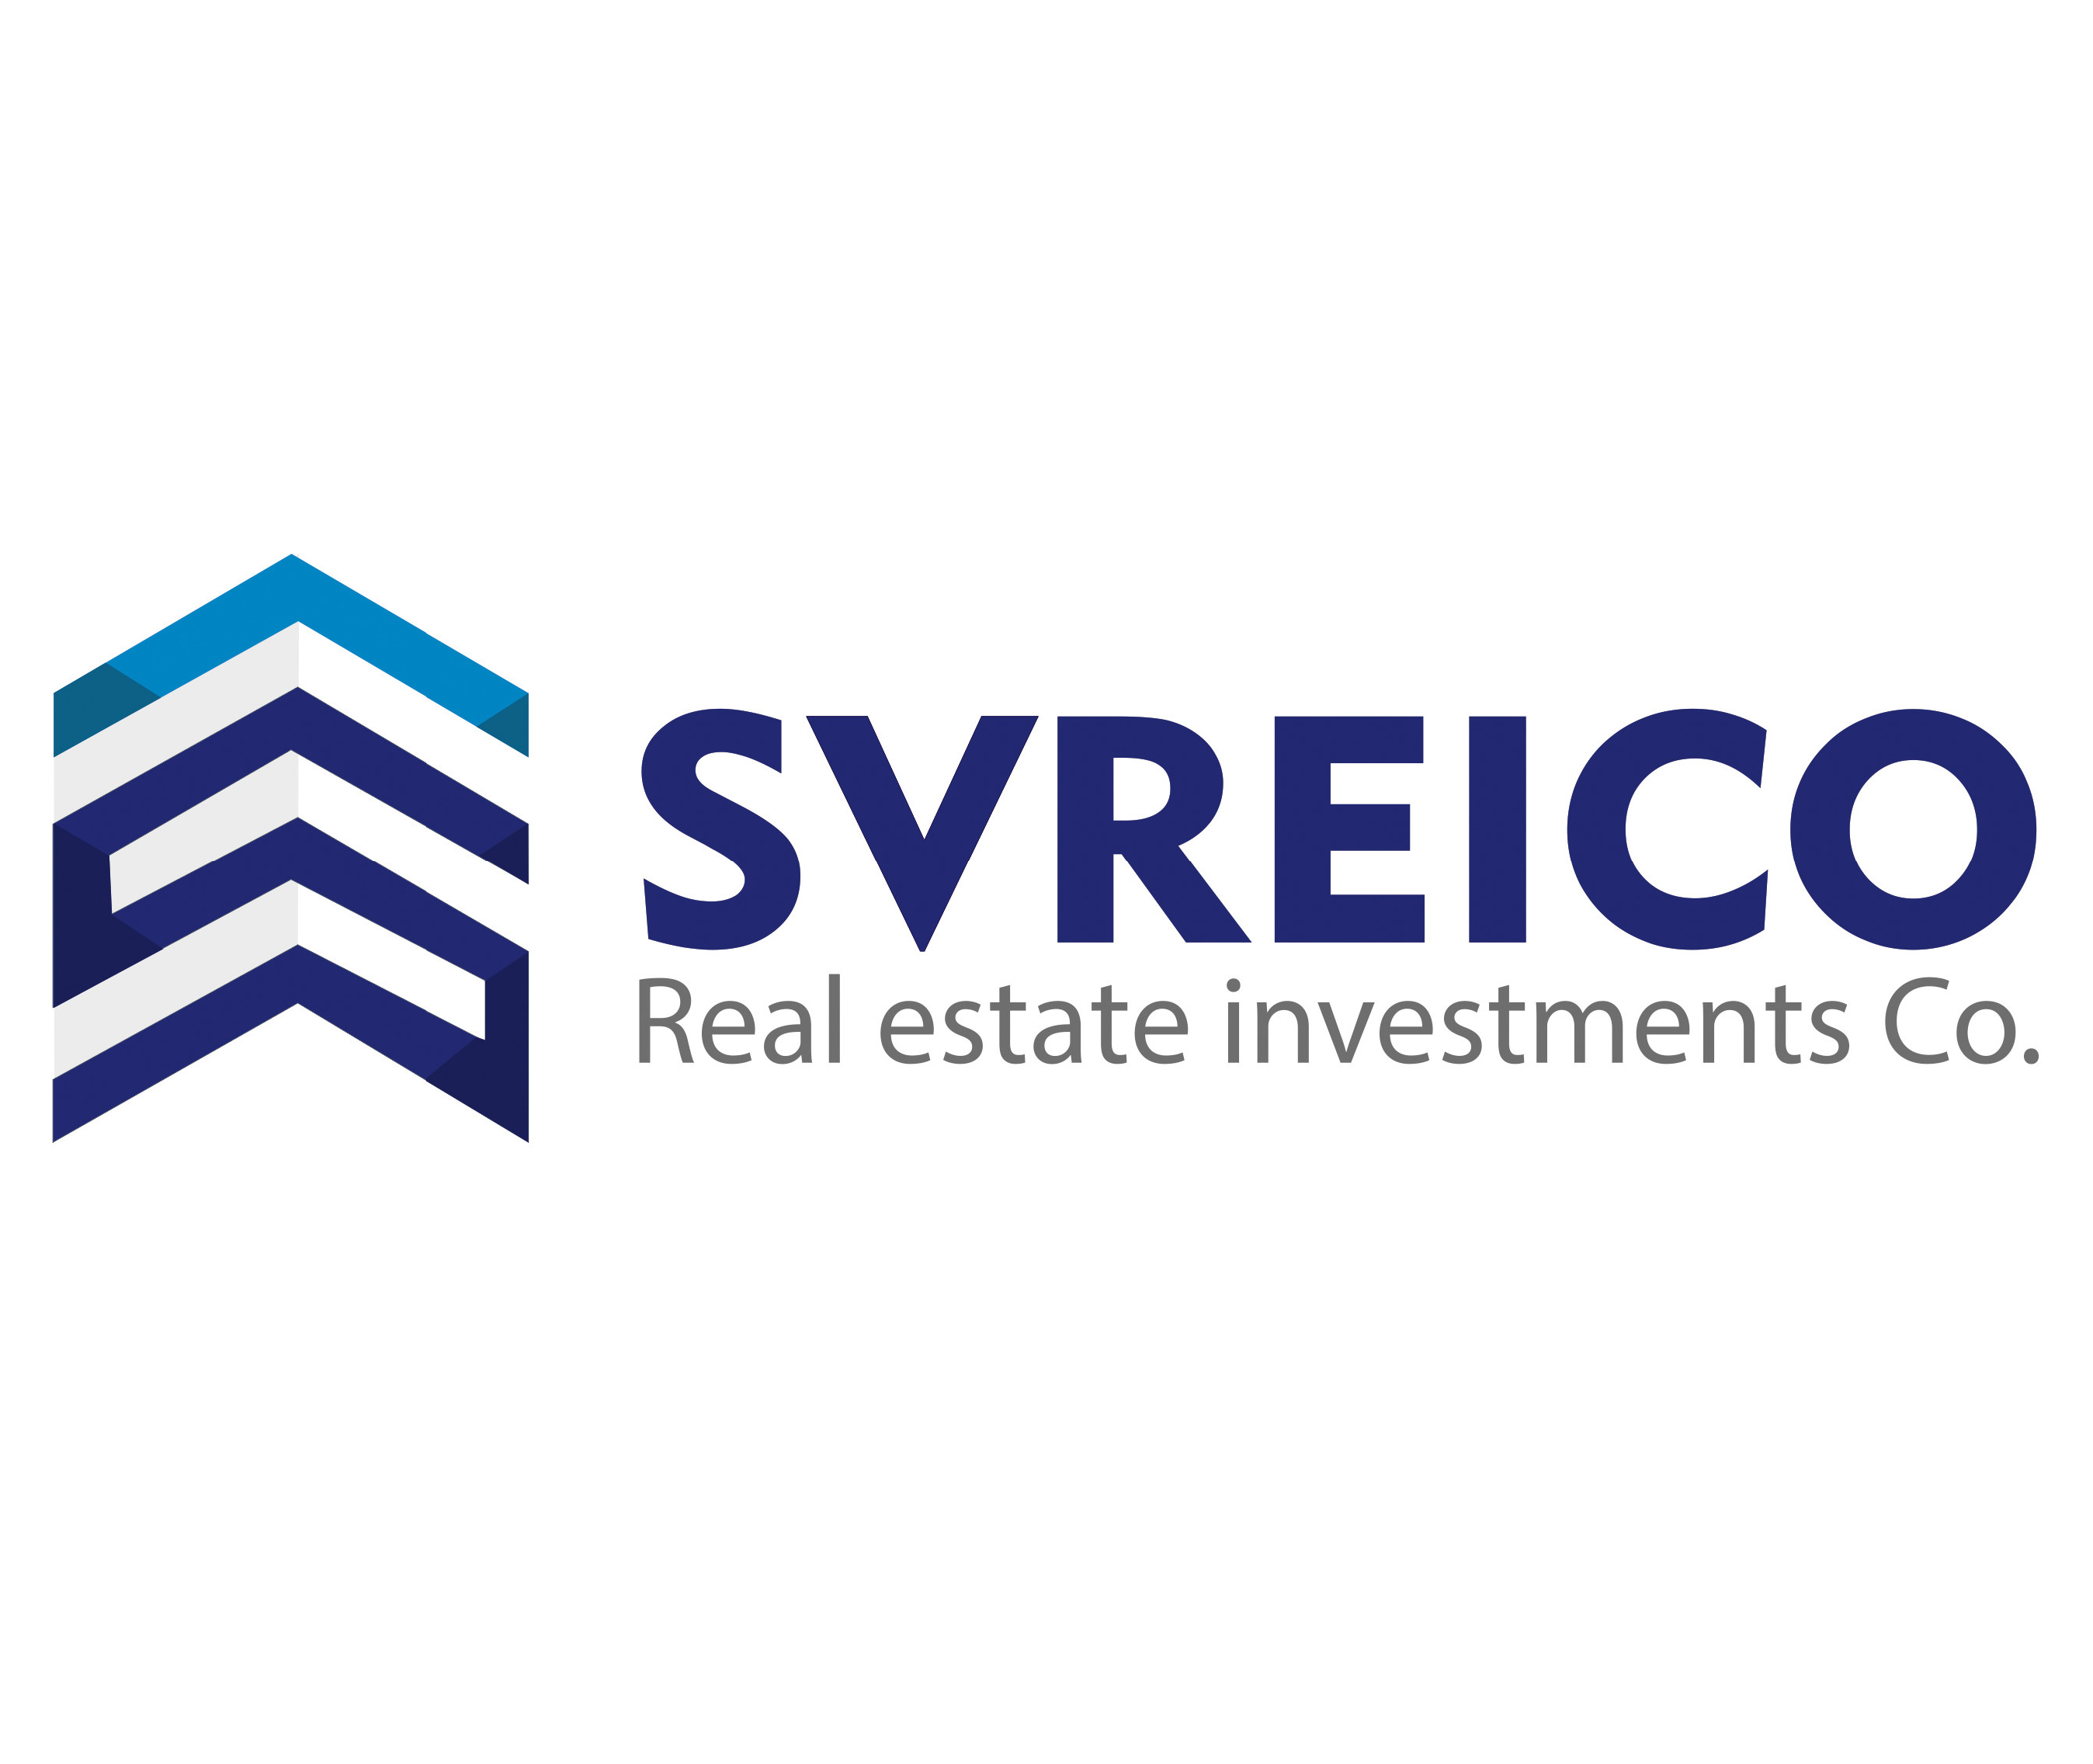 SVREICO Real Estate Investments